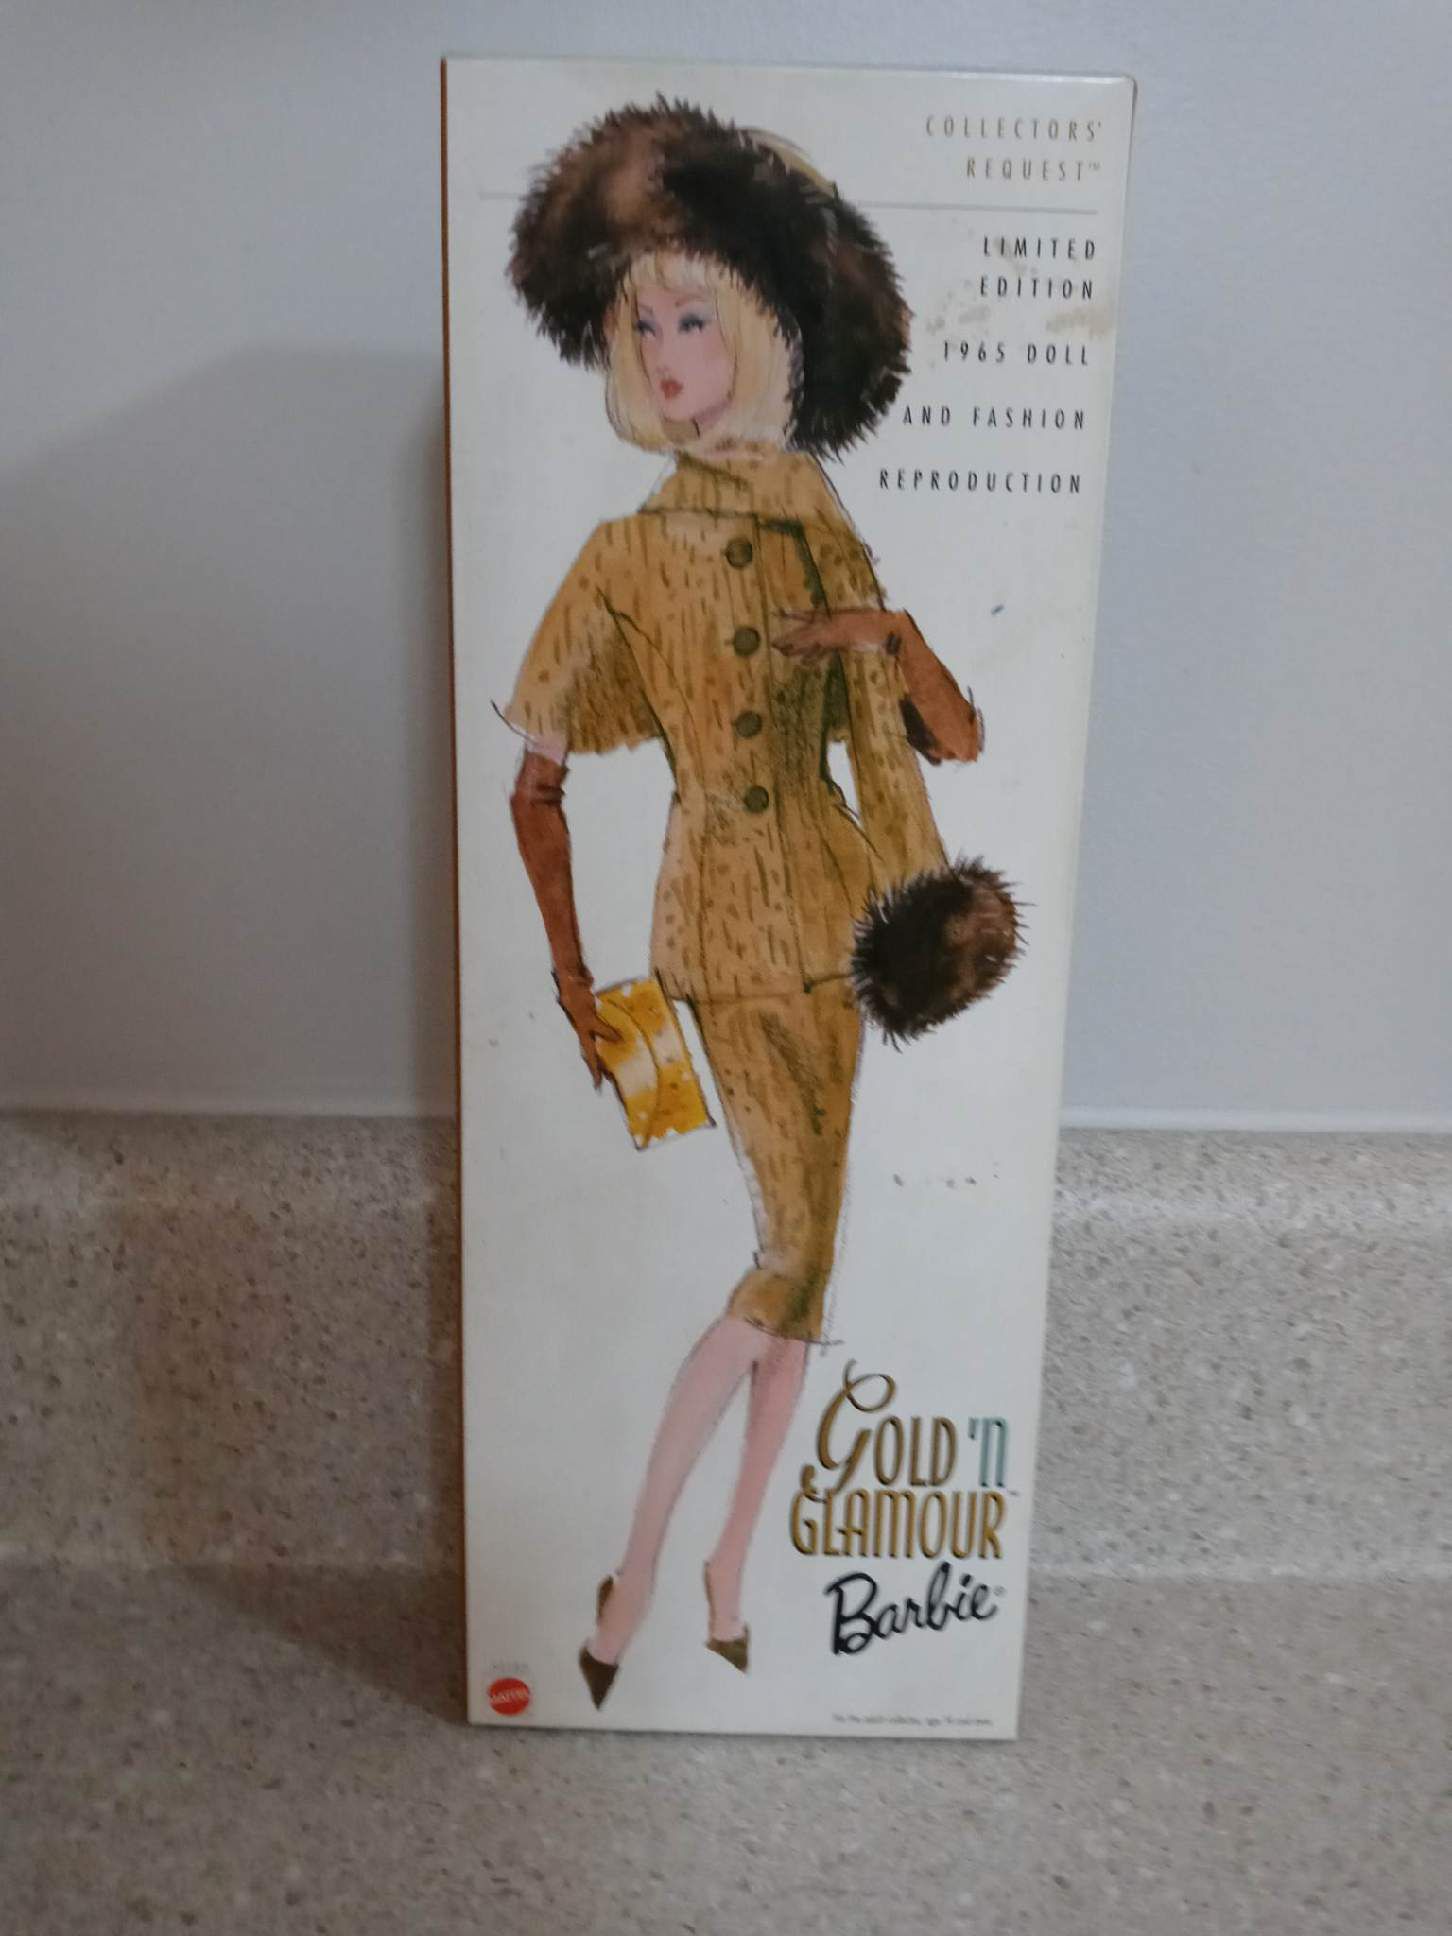 2001 Reproduction 1965 Gold-n-Glamour Barbie 